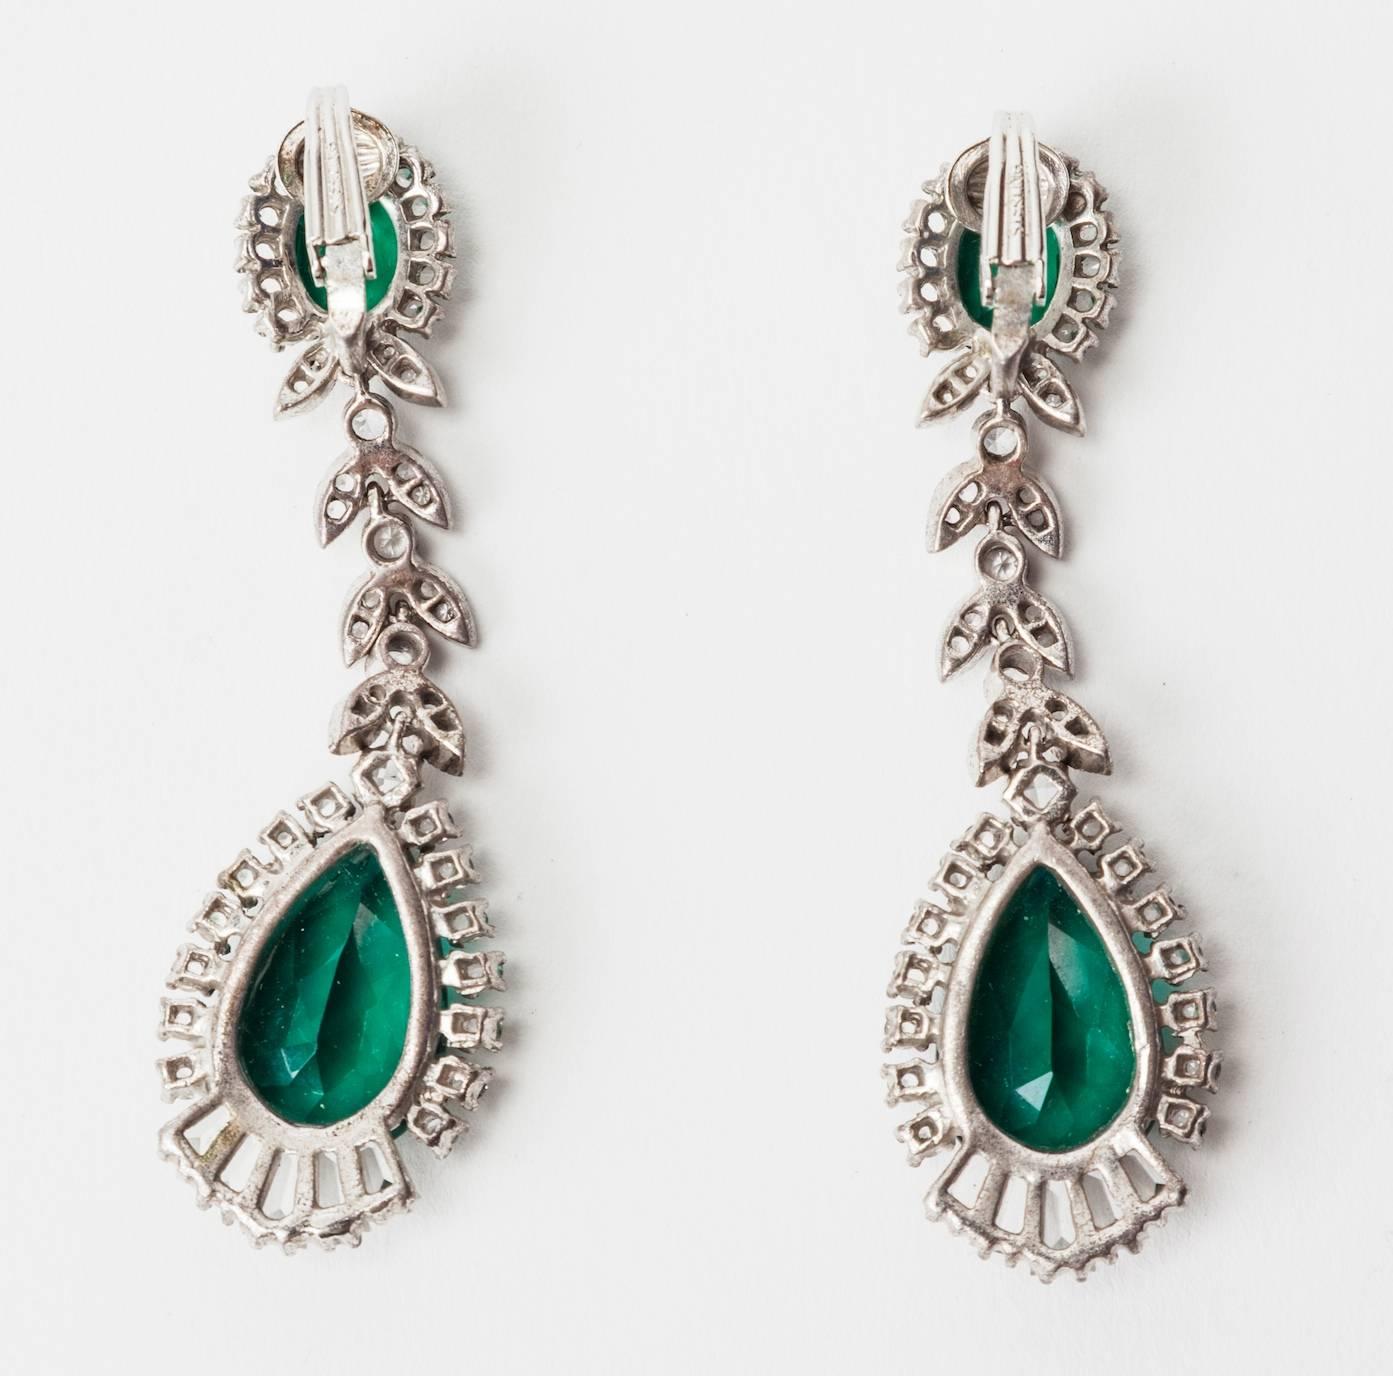 Elegant Faux Emerald Paste Earrings set in sterling silver made to replicate fine jewelry. Beautiful quality, and completely articulated. Striking scale, set with unfoiled crystals in crystal and emerald with tapered baguettes. 1950's USA. Clip back